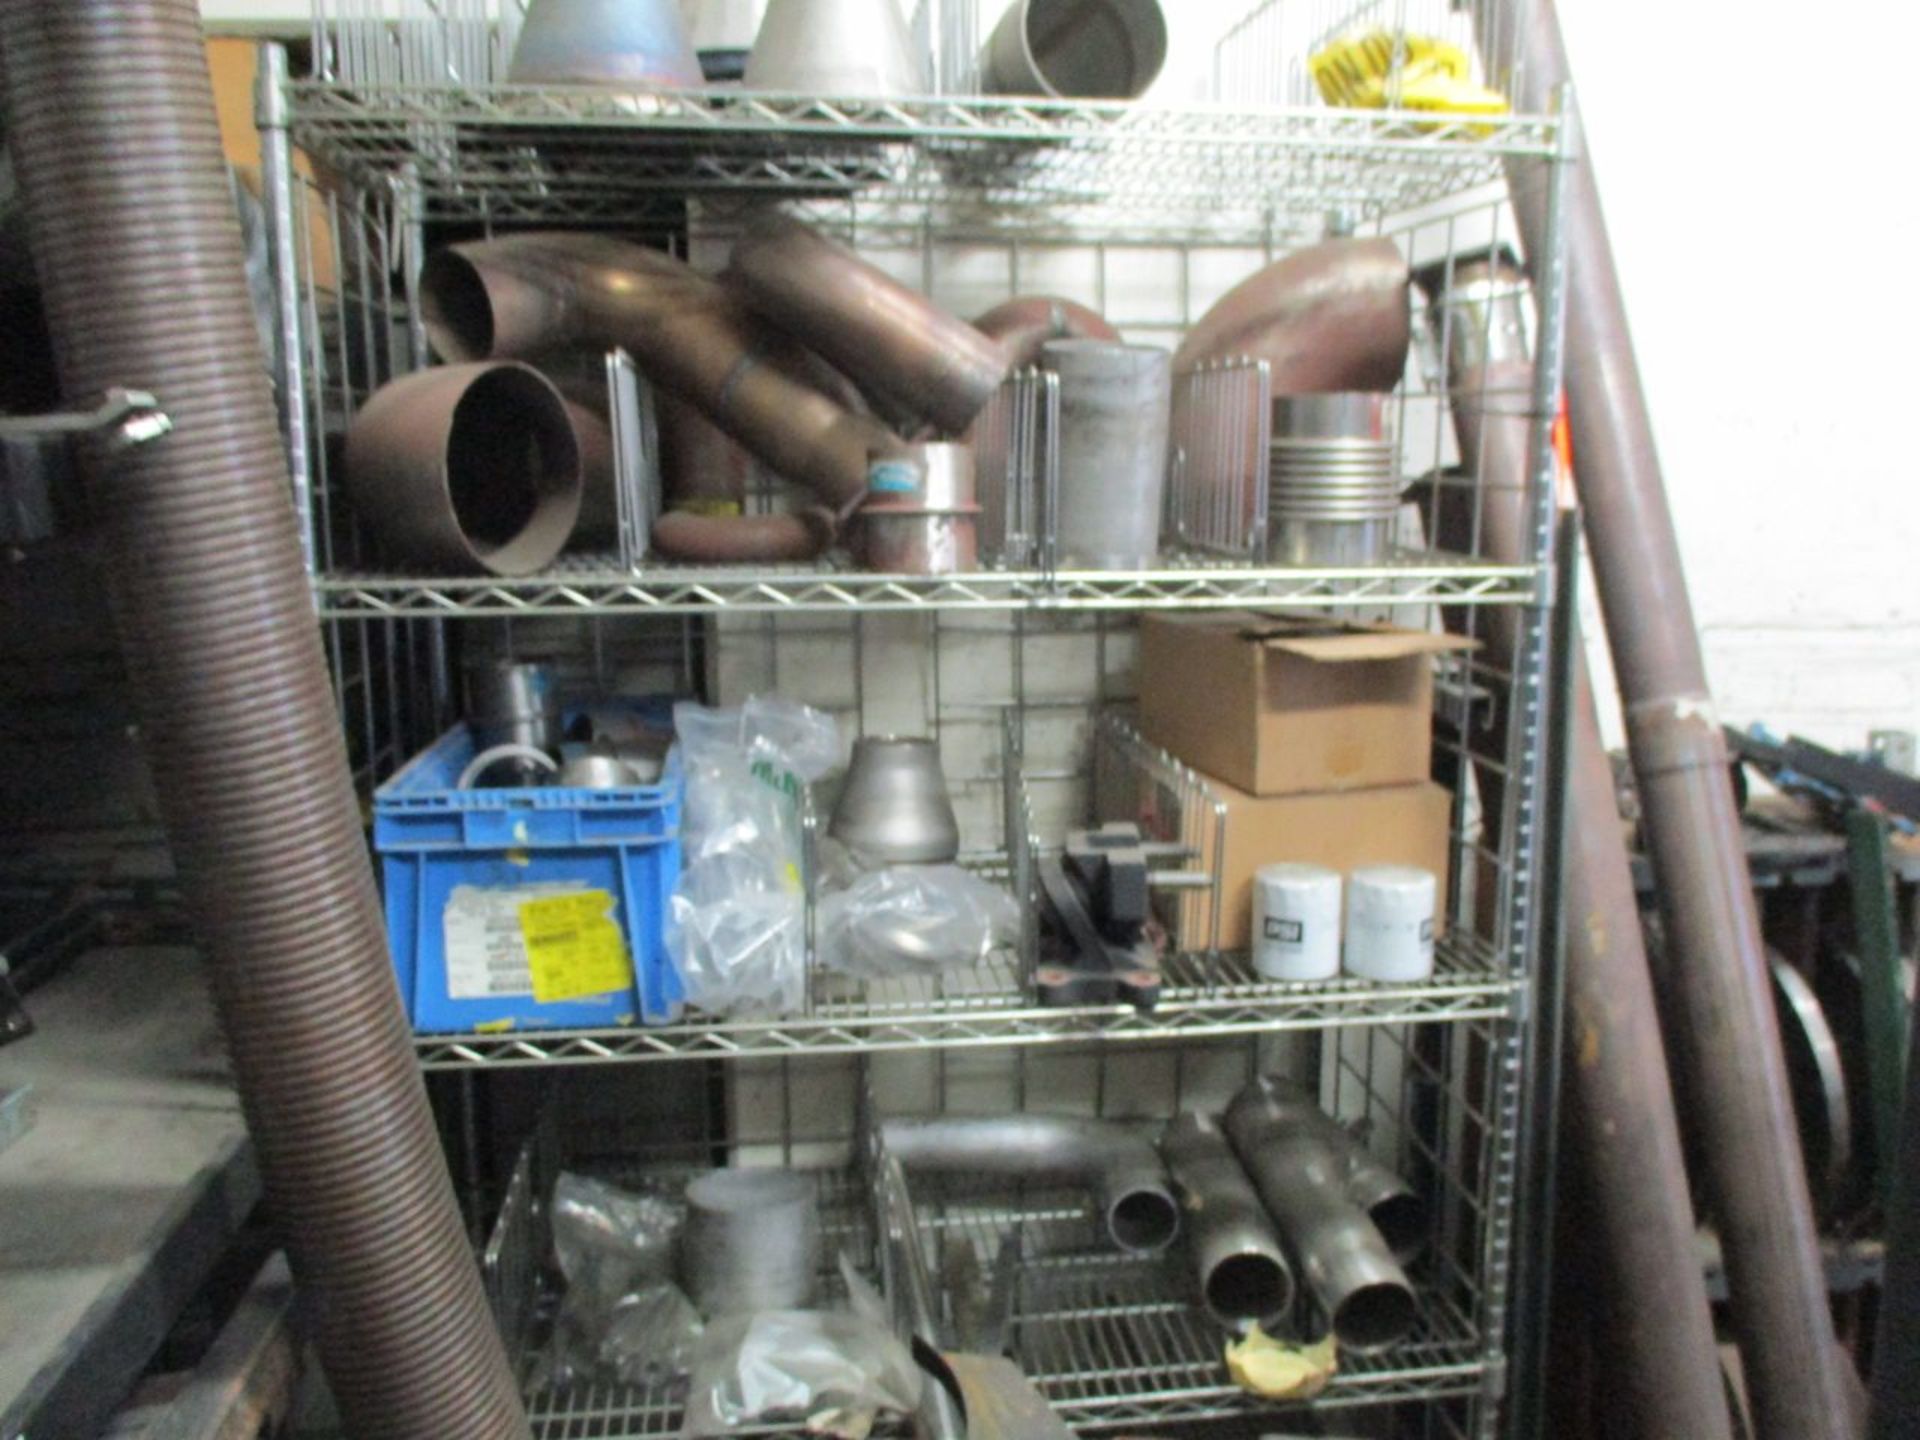 (2) Sections of Steel Shelving, Wire and Chrome Rack with Pipe Fittings (Building 9 Area 3 - Pipe - Image 3 of 3